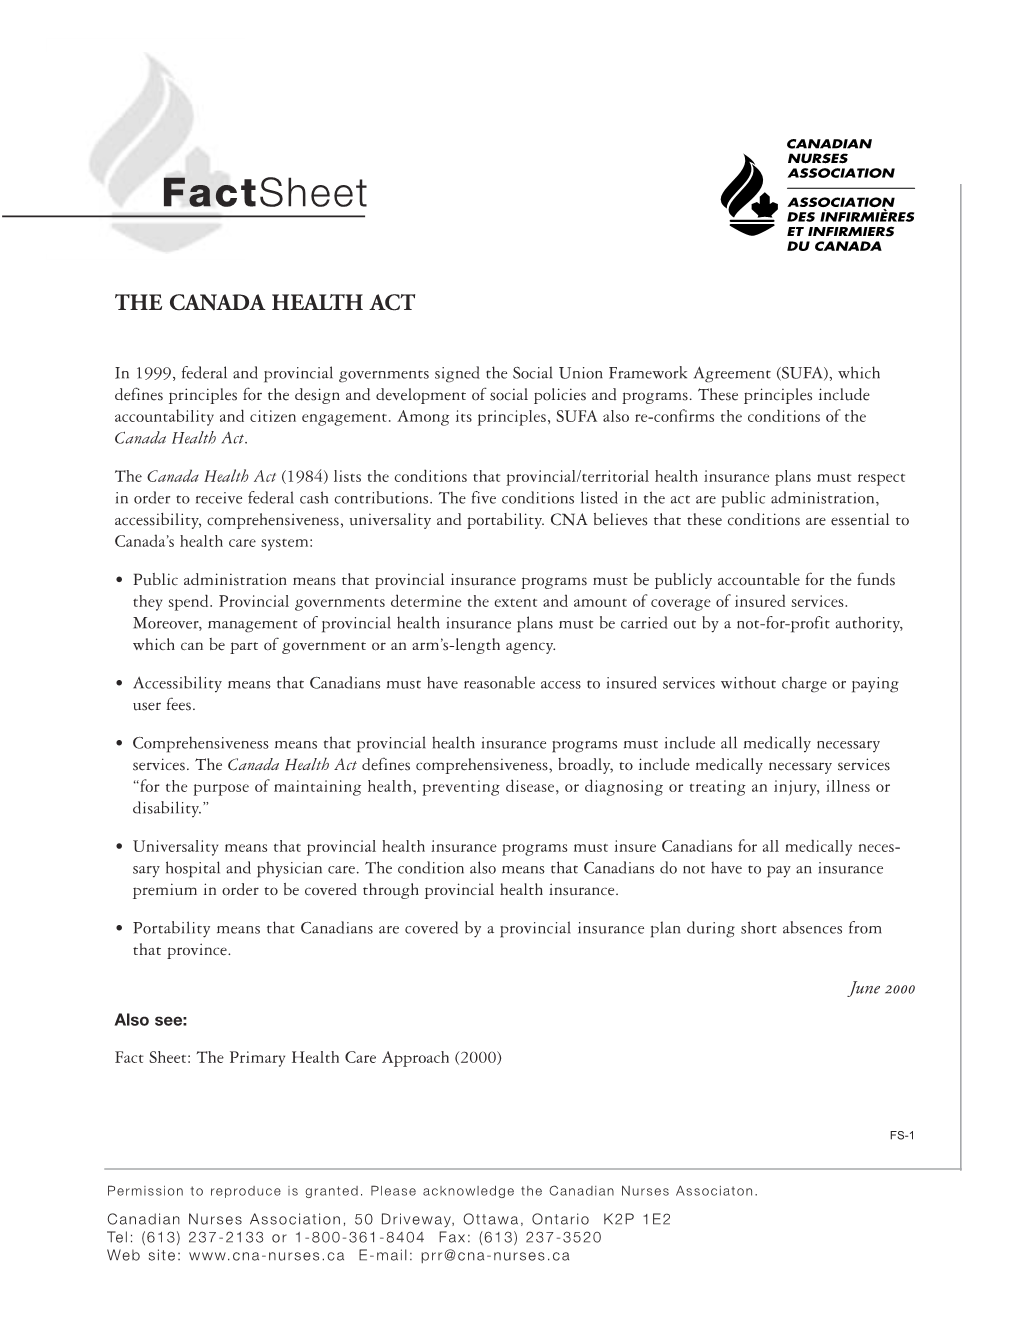 The Canada Health Act